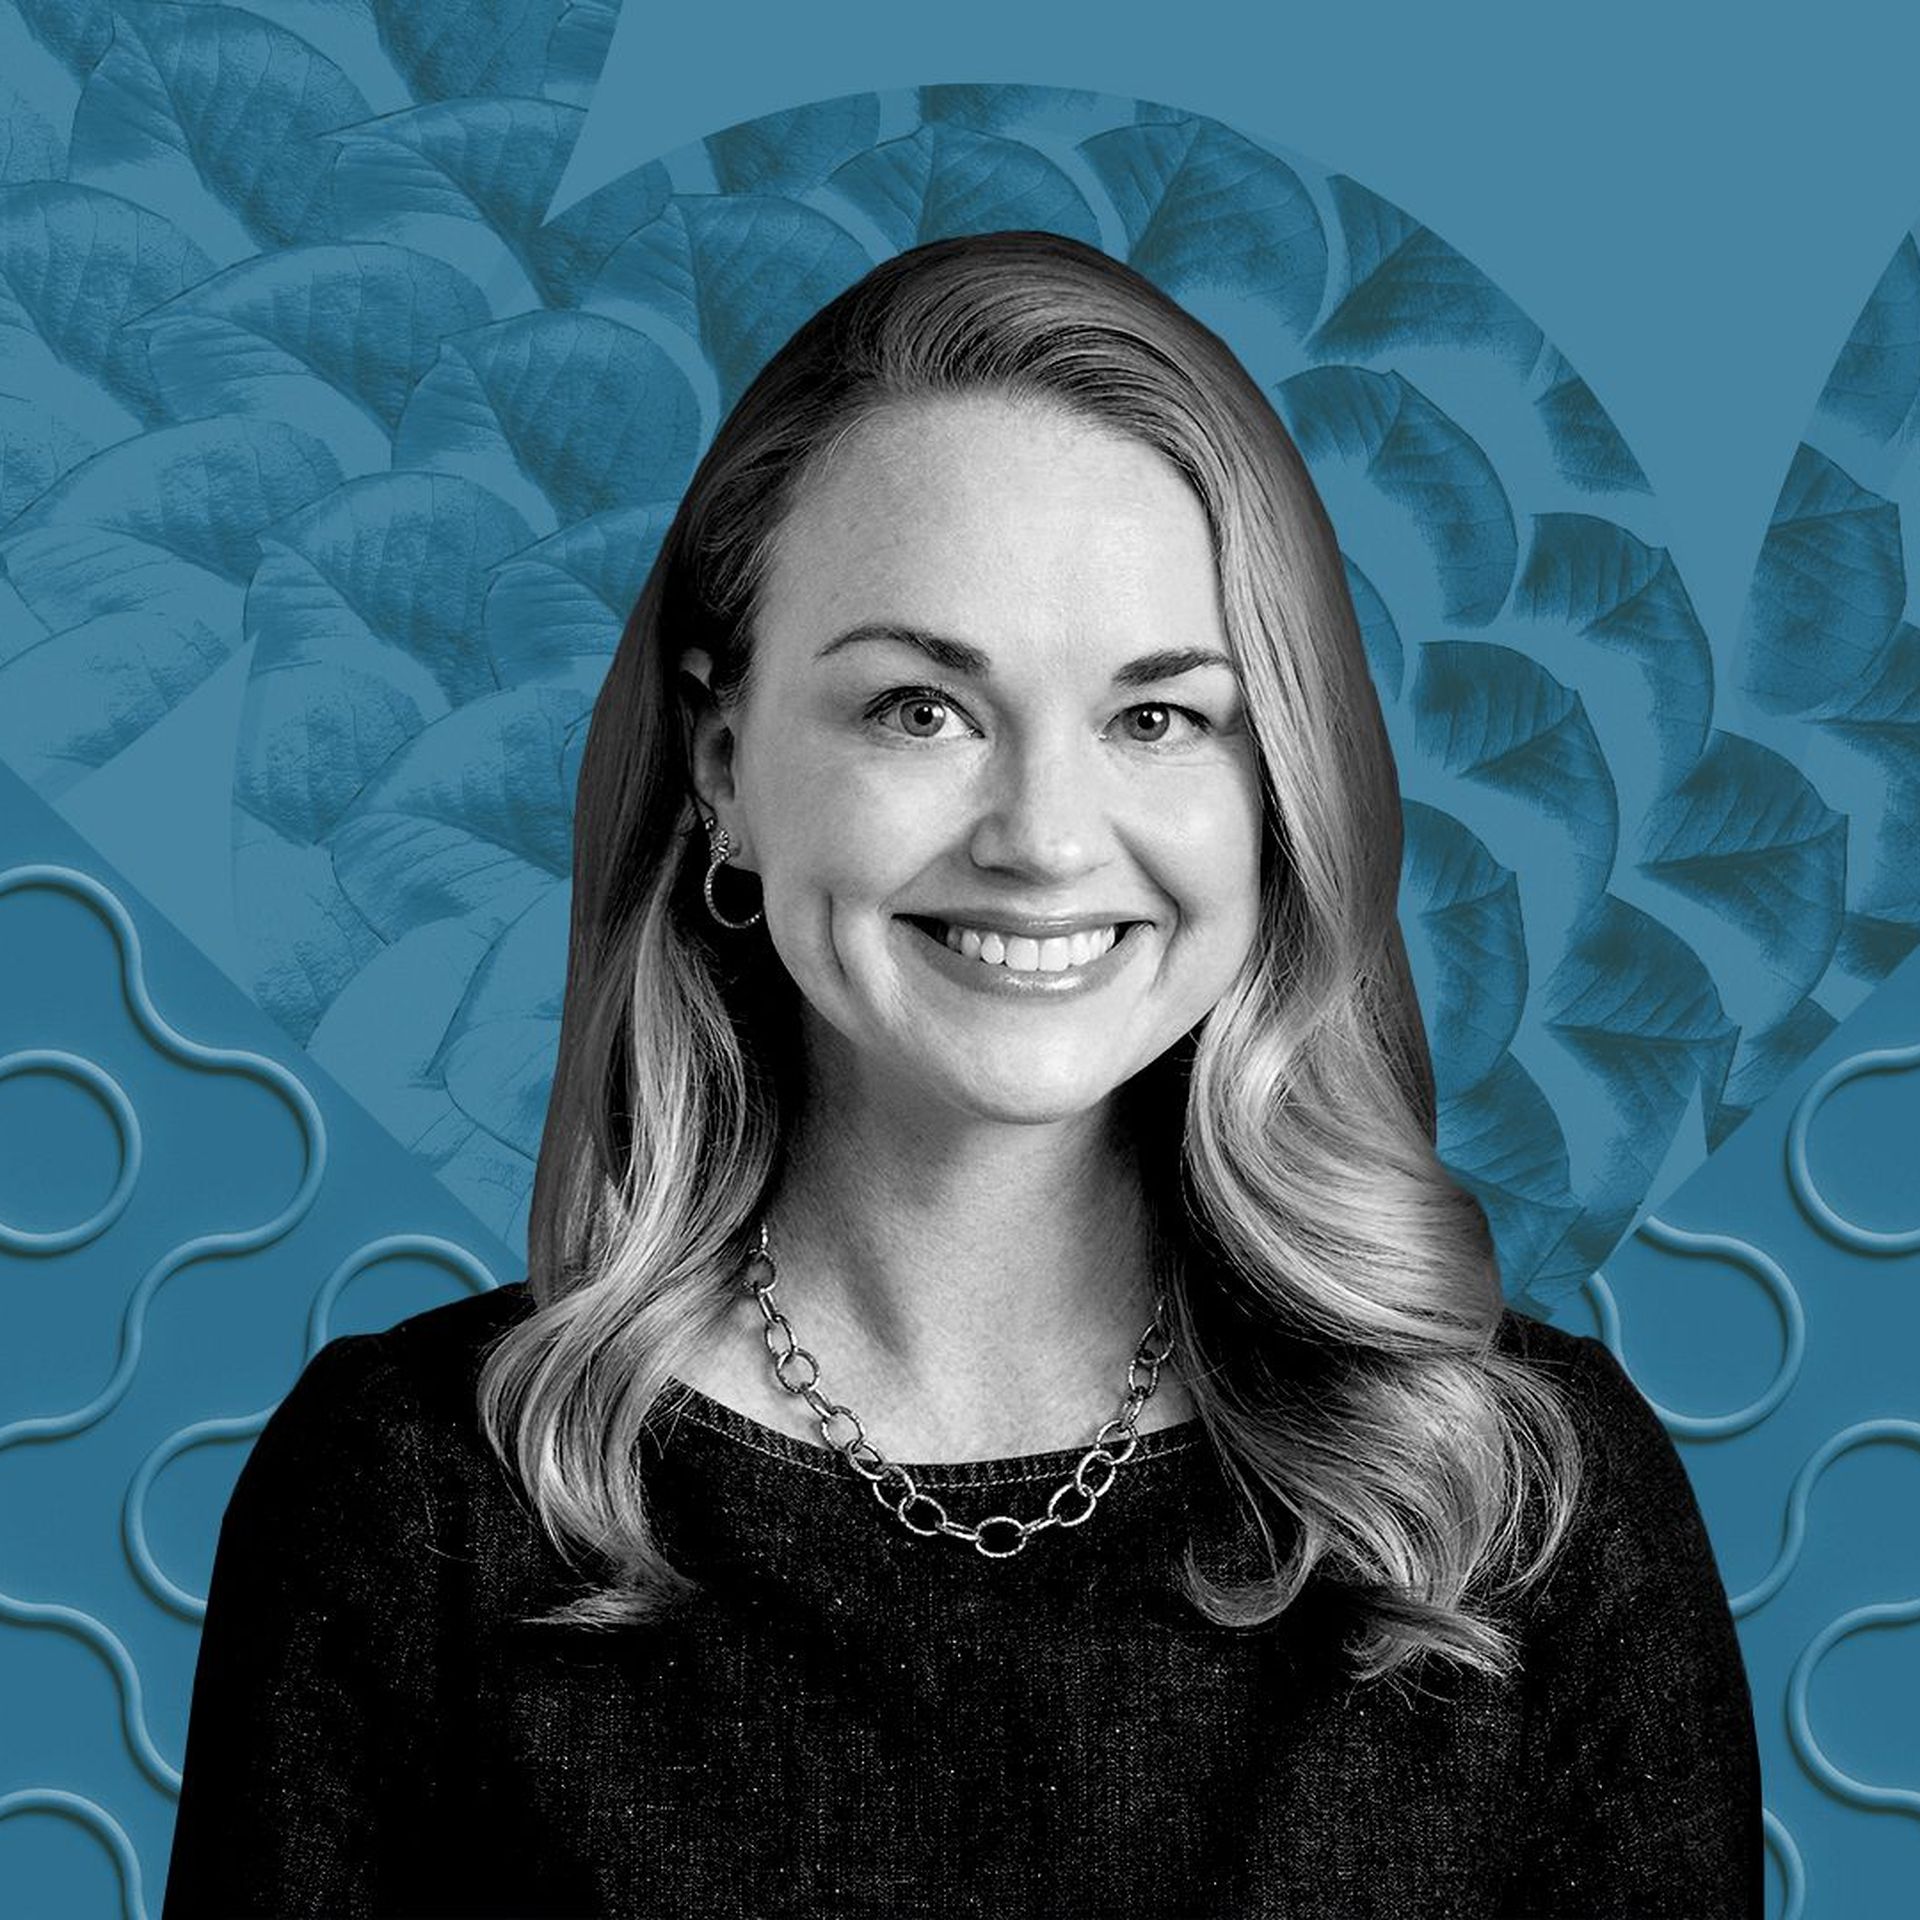 Photo illustration of Dani Dudeck in front of patterned background shapes